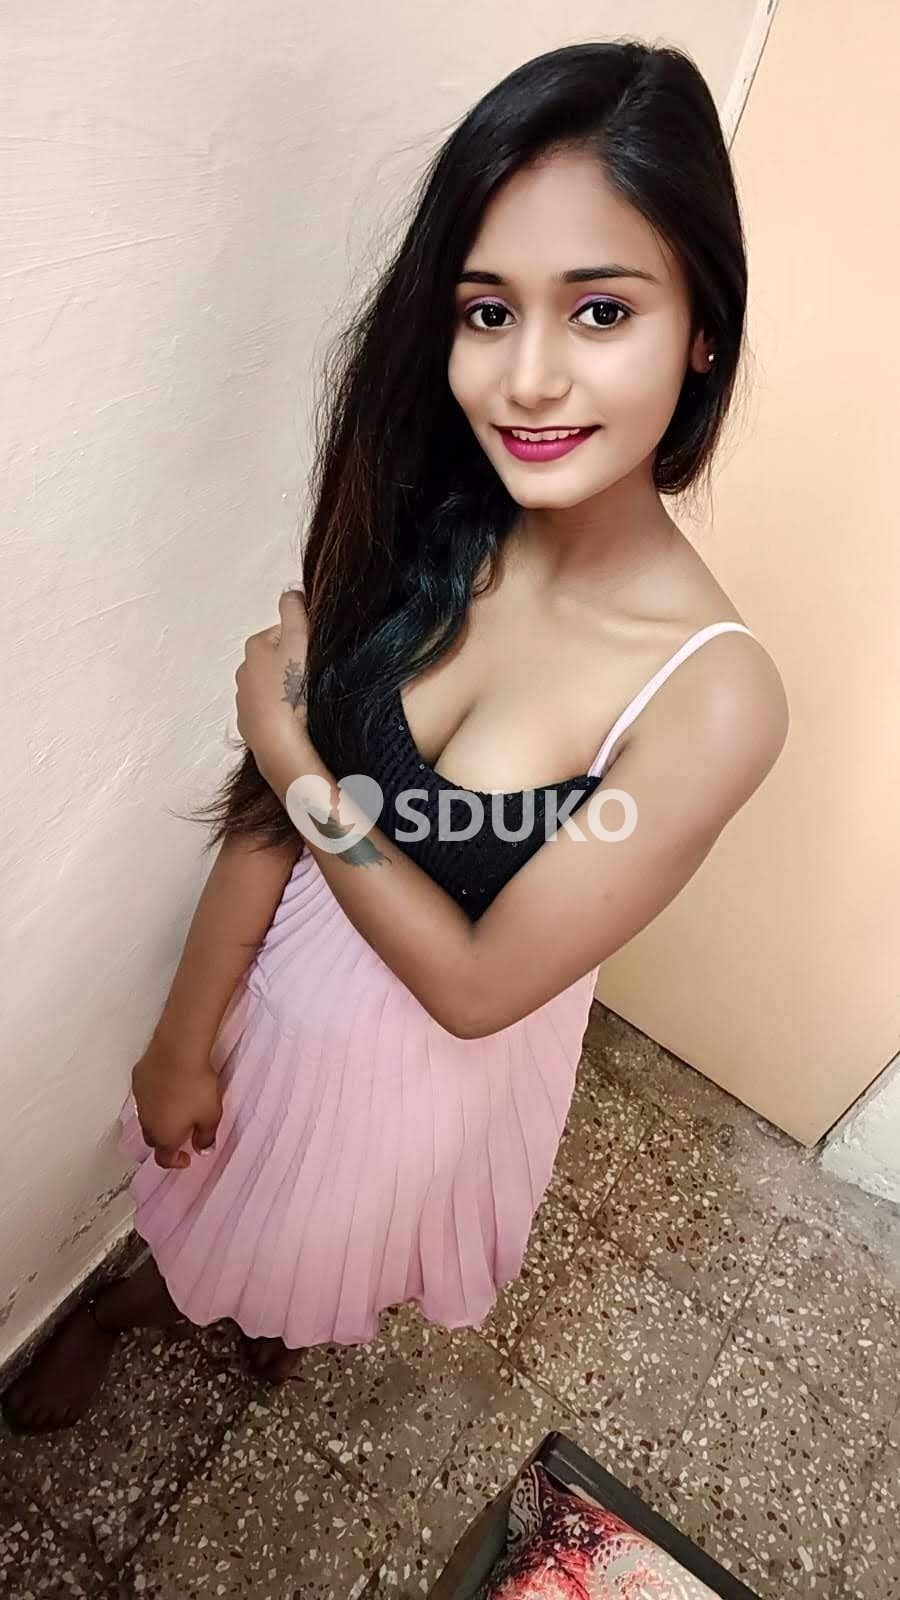 Ashok nagar BEST DIRECT LOW PRICE BEST VIP GENUINE COLLEGE GIRL SERVICE AVAILABLE FULL SATISFACTION TOP MODEL